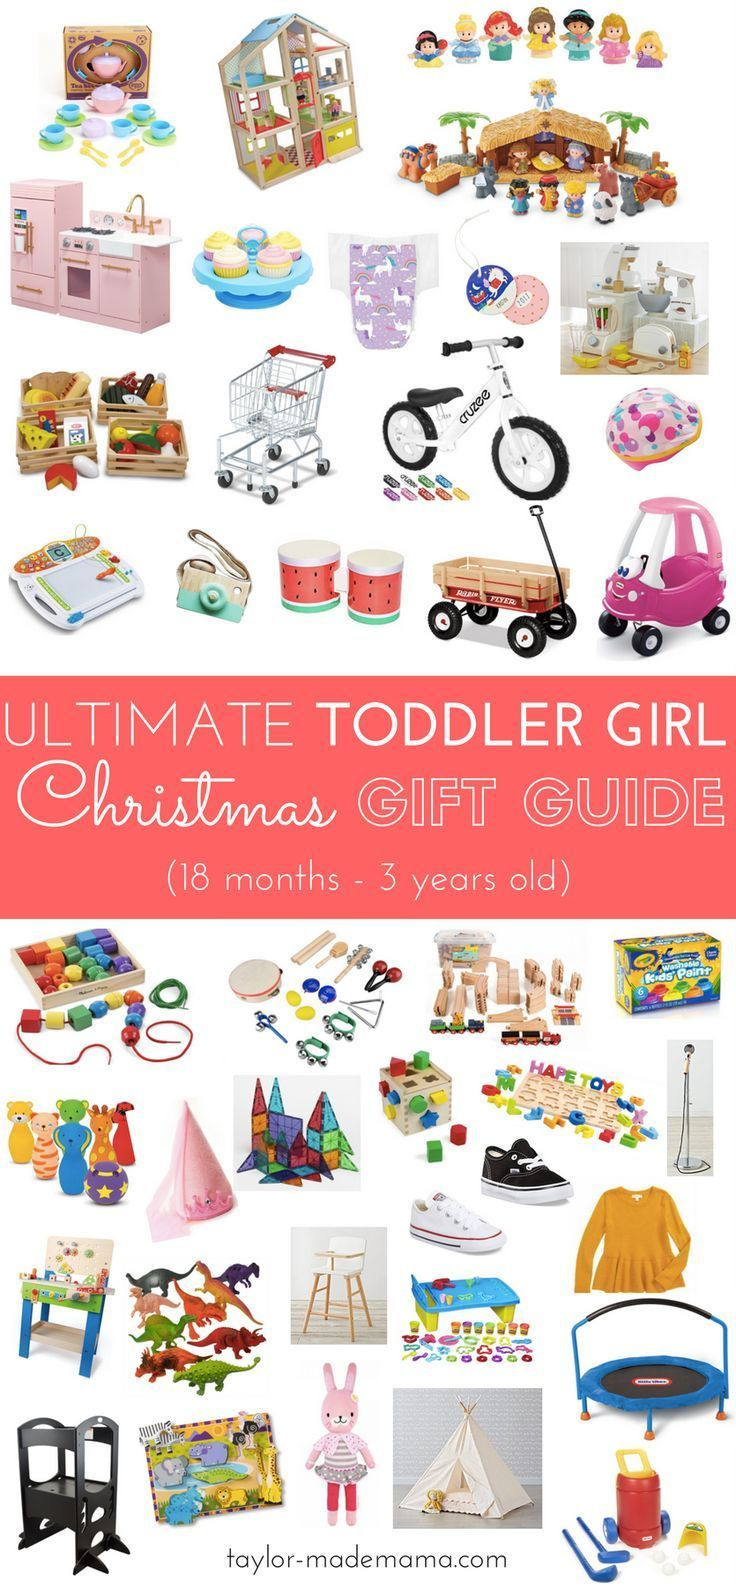 5 Month Old Christmas Gift Ideas
 Pin on HOLIDAY